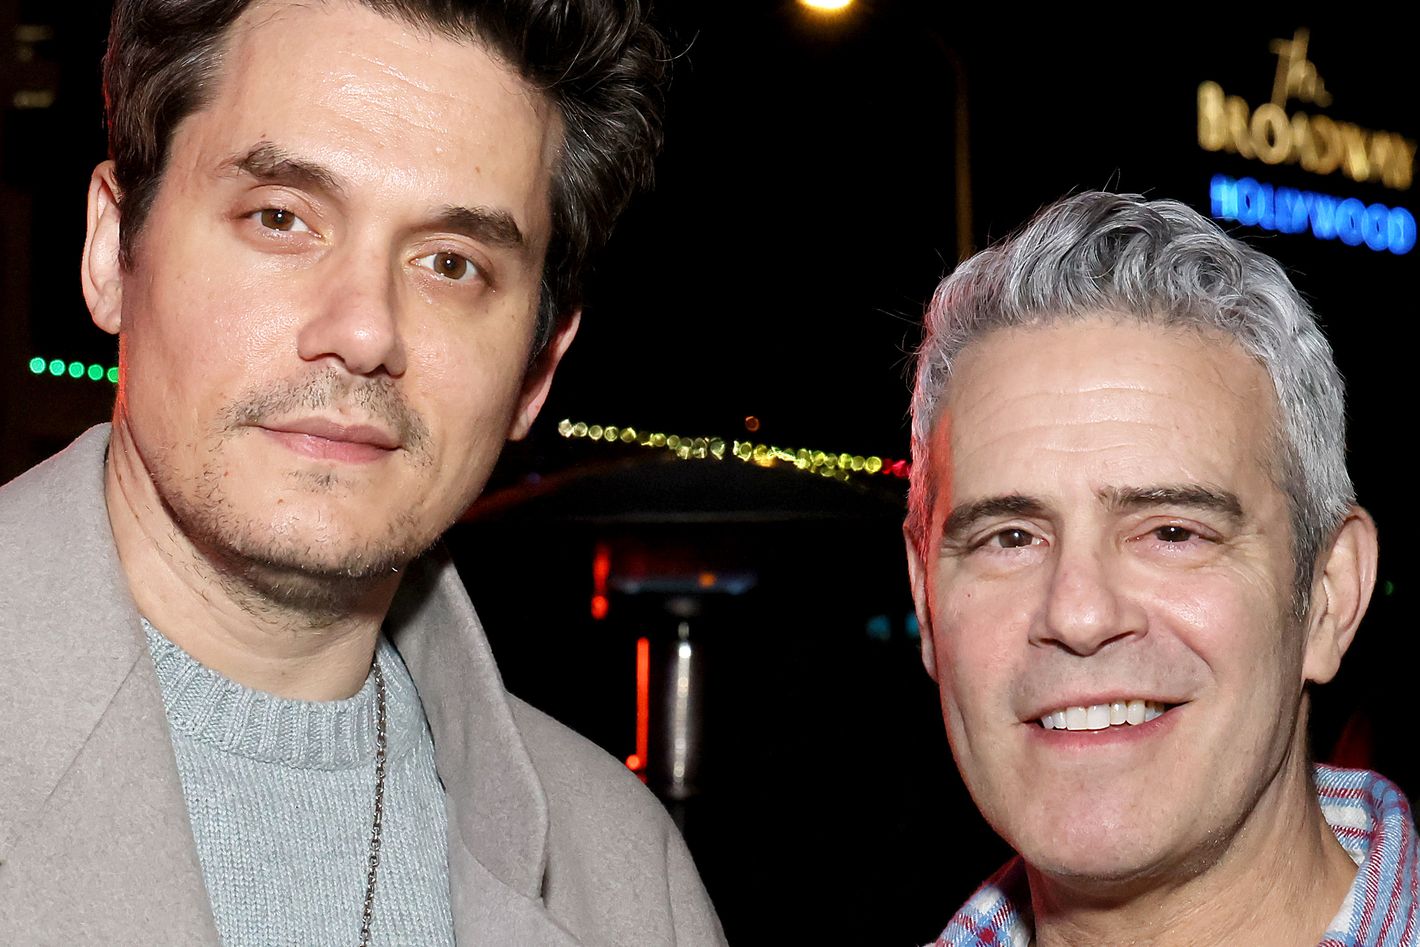 John Mayer Swears He and Andy Cohen Are Just Friends